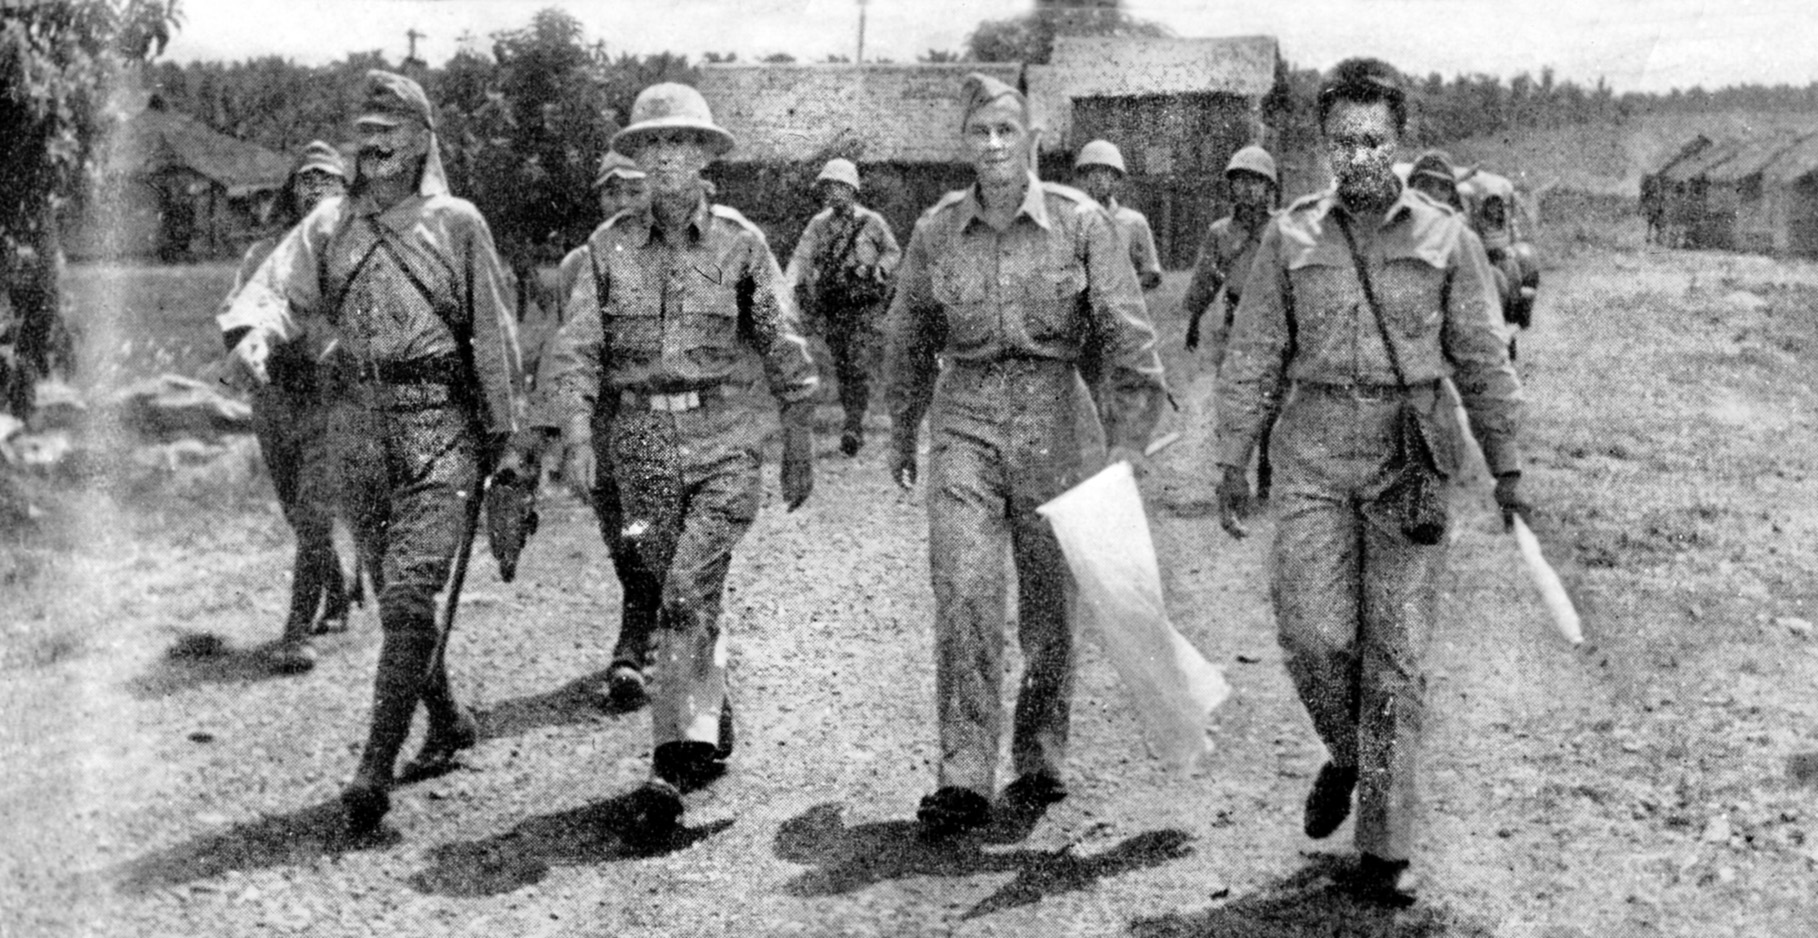 Abandoned by the U.S., American officers are led by their Japanese captors to sign surrender terms on the Bataan Peninsula. 